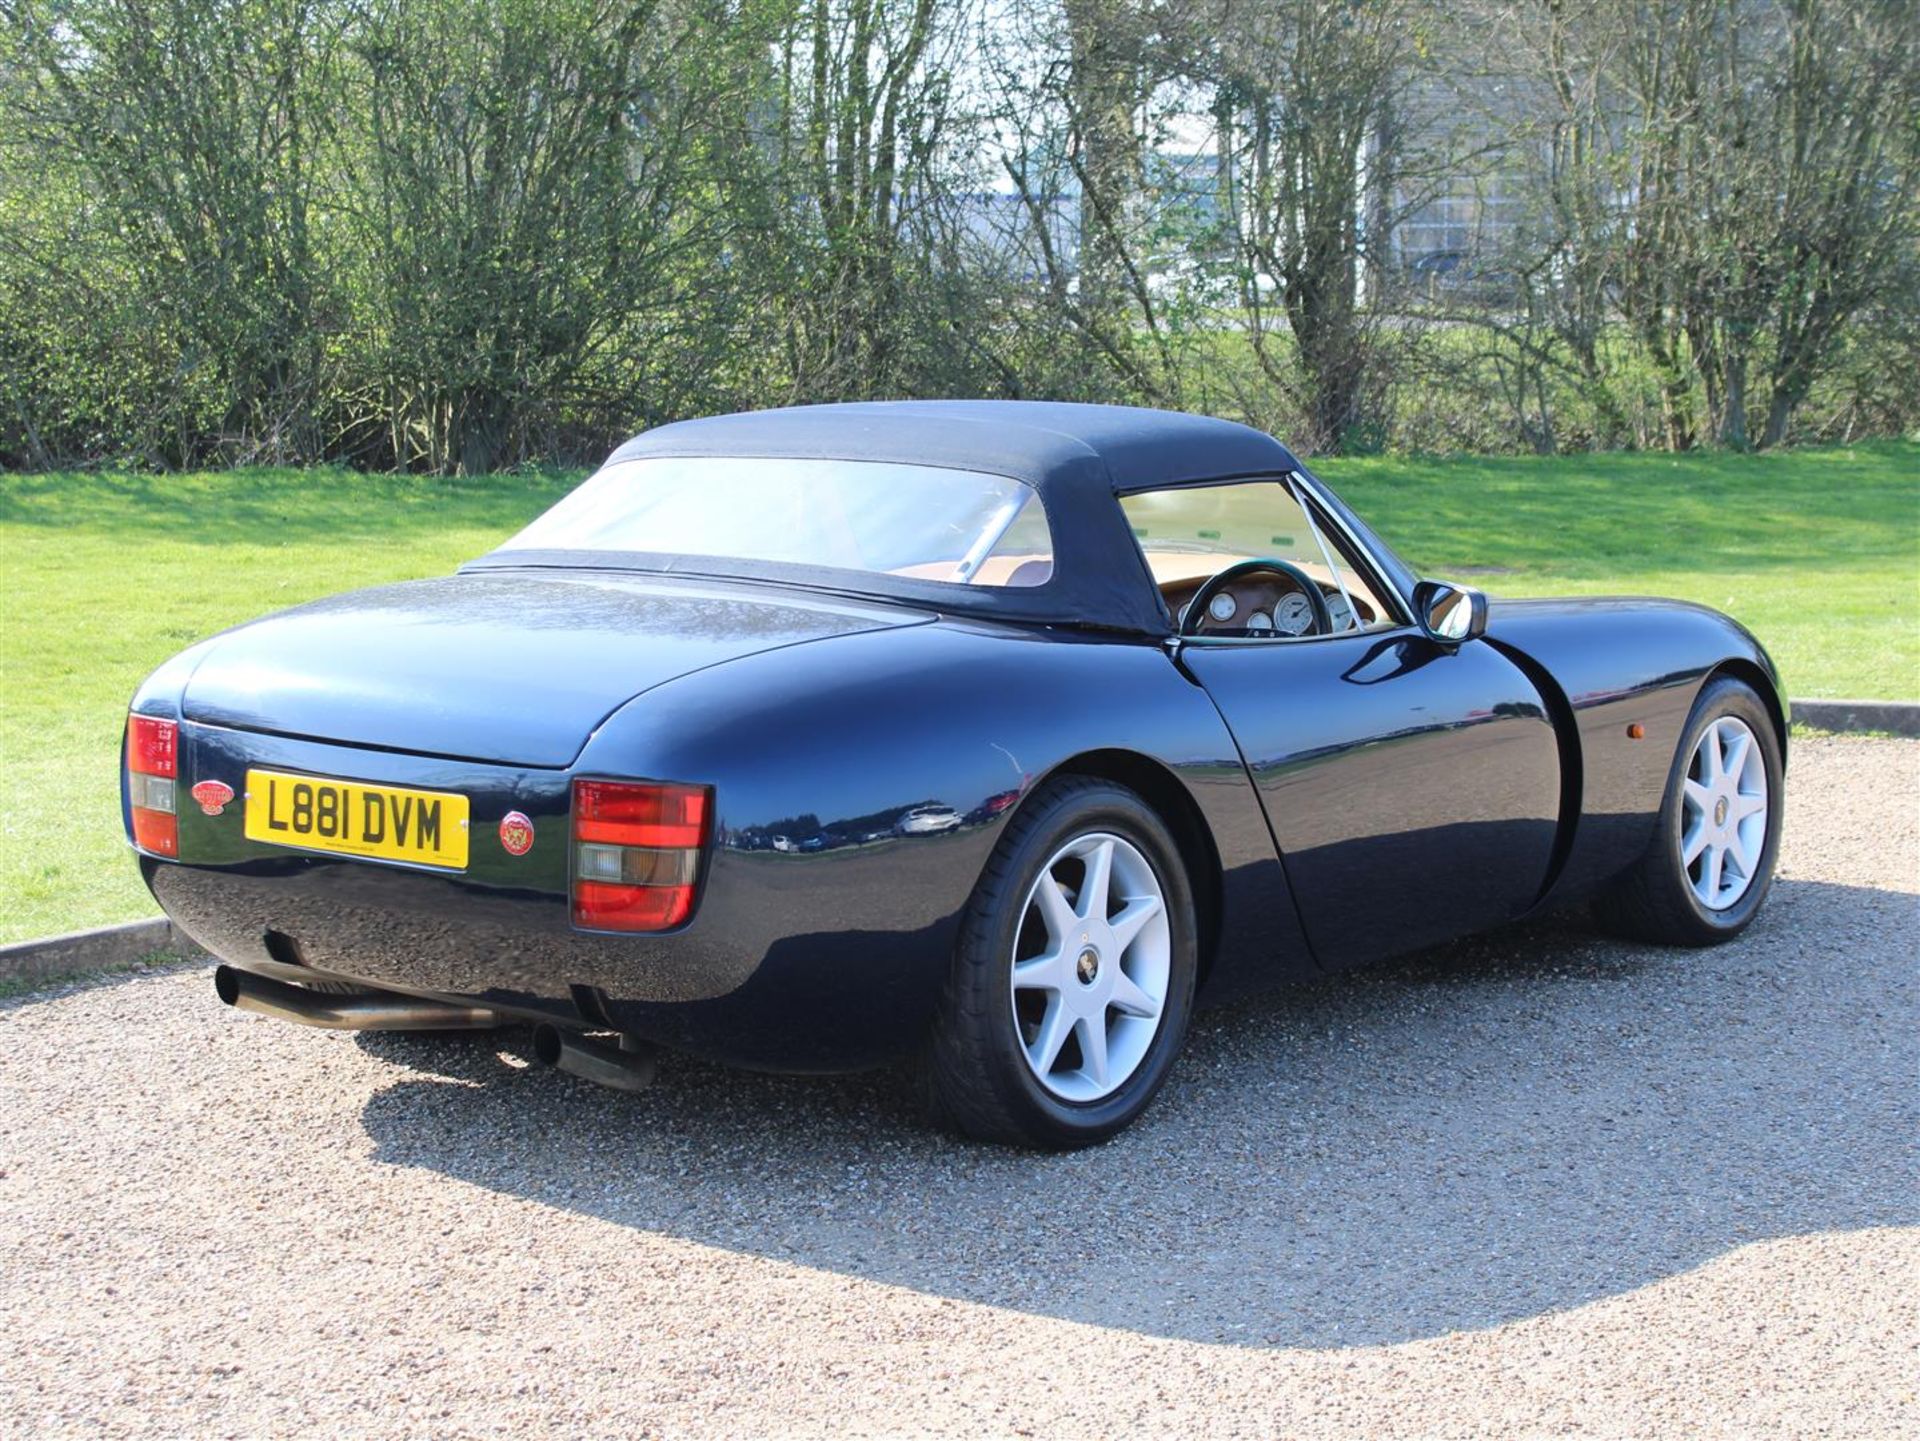 1993 TVR Griffith 500 - Image 6 of 19